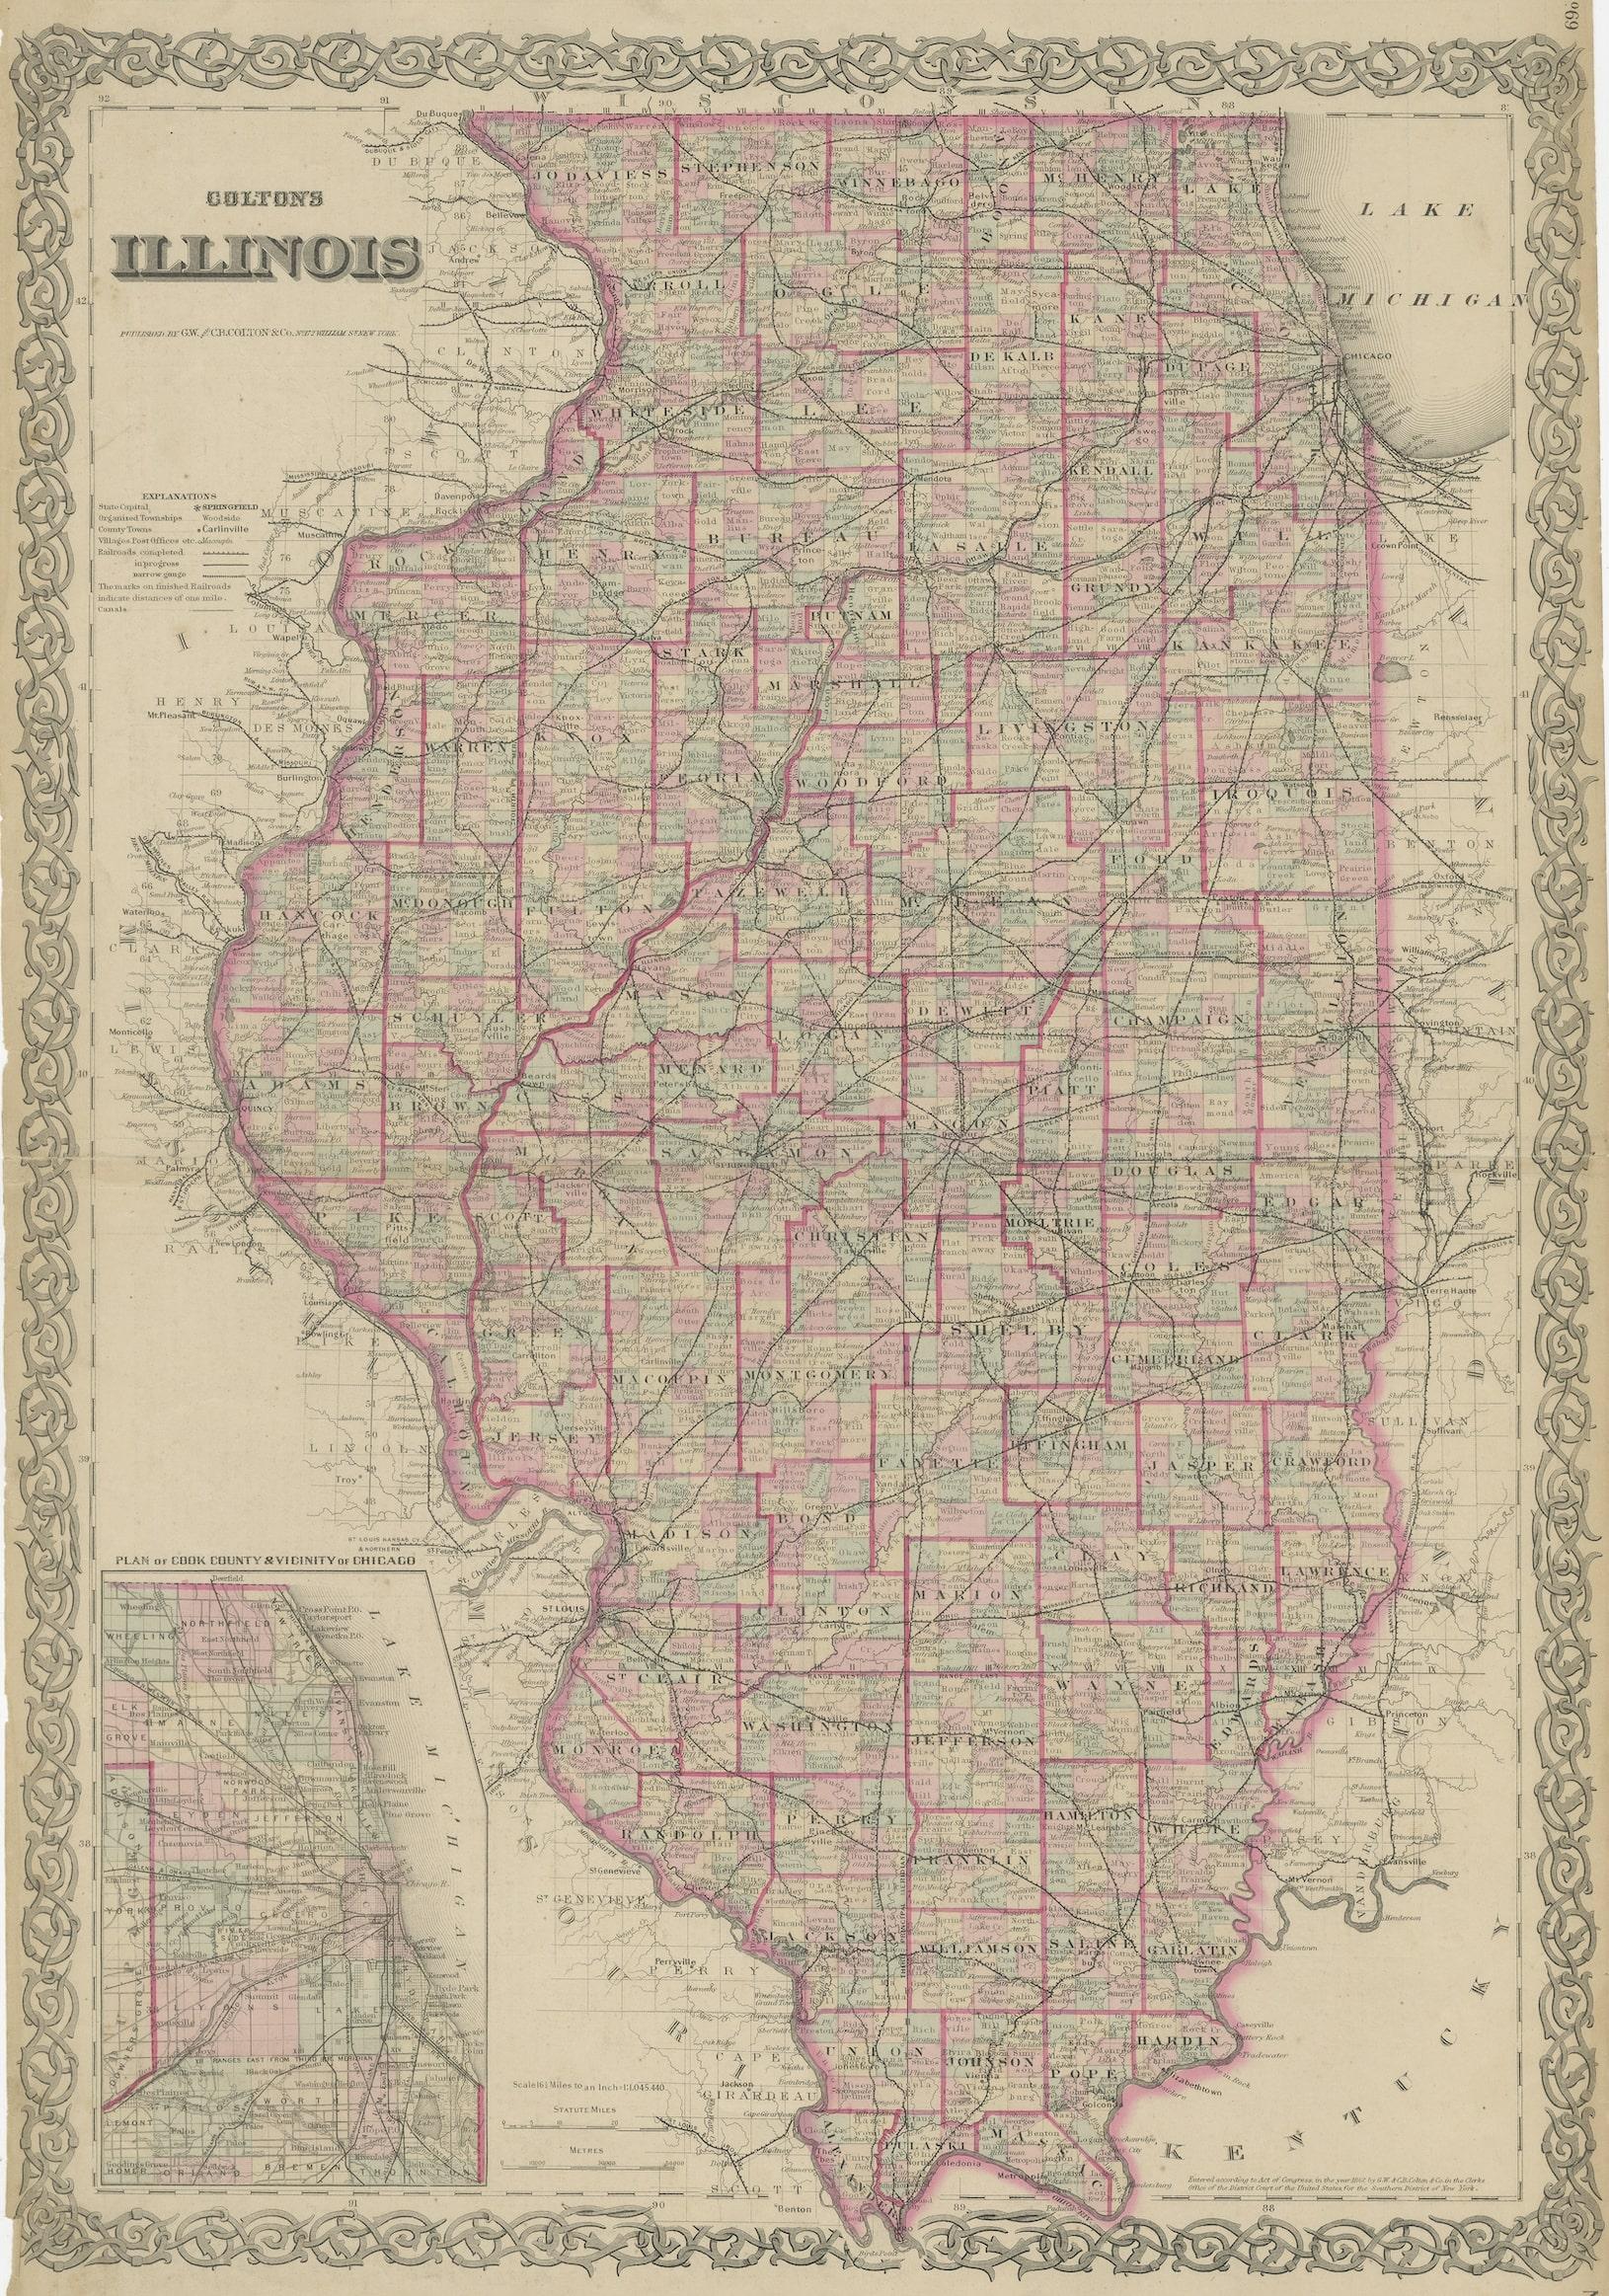 Antique map titled 'Colton's Illinois'. Antique map of Illinois, a state in the Midwestern United States. With an inset map of of Cook County & Vicinity of Chicago. Published 1867. 

Joseph Hutchins Colton (July 5, 1800 – July 29, 1893), known